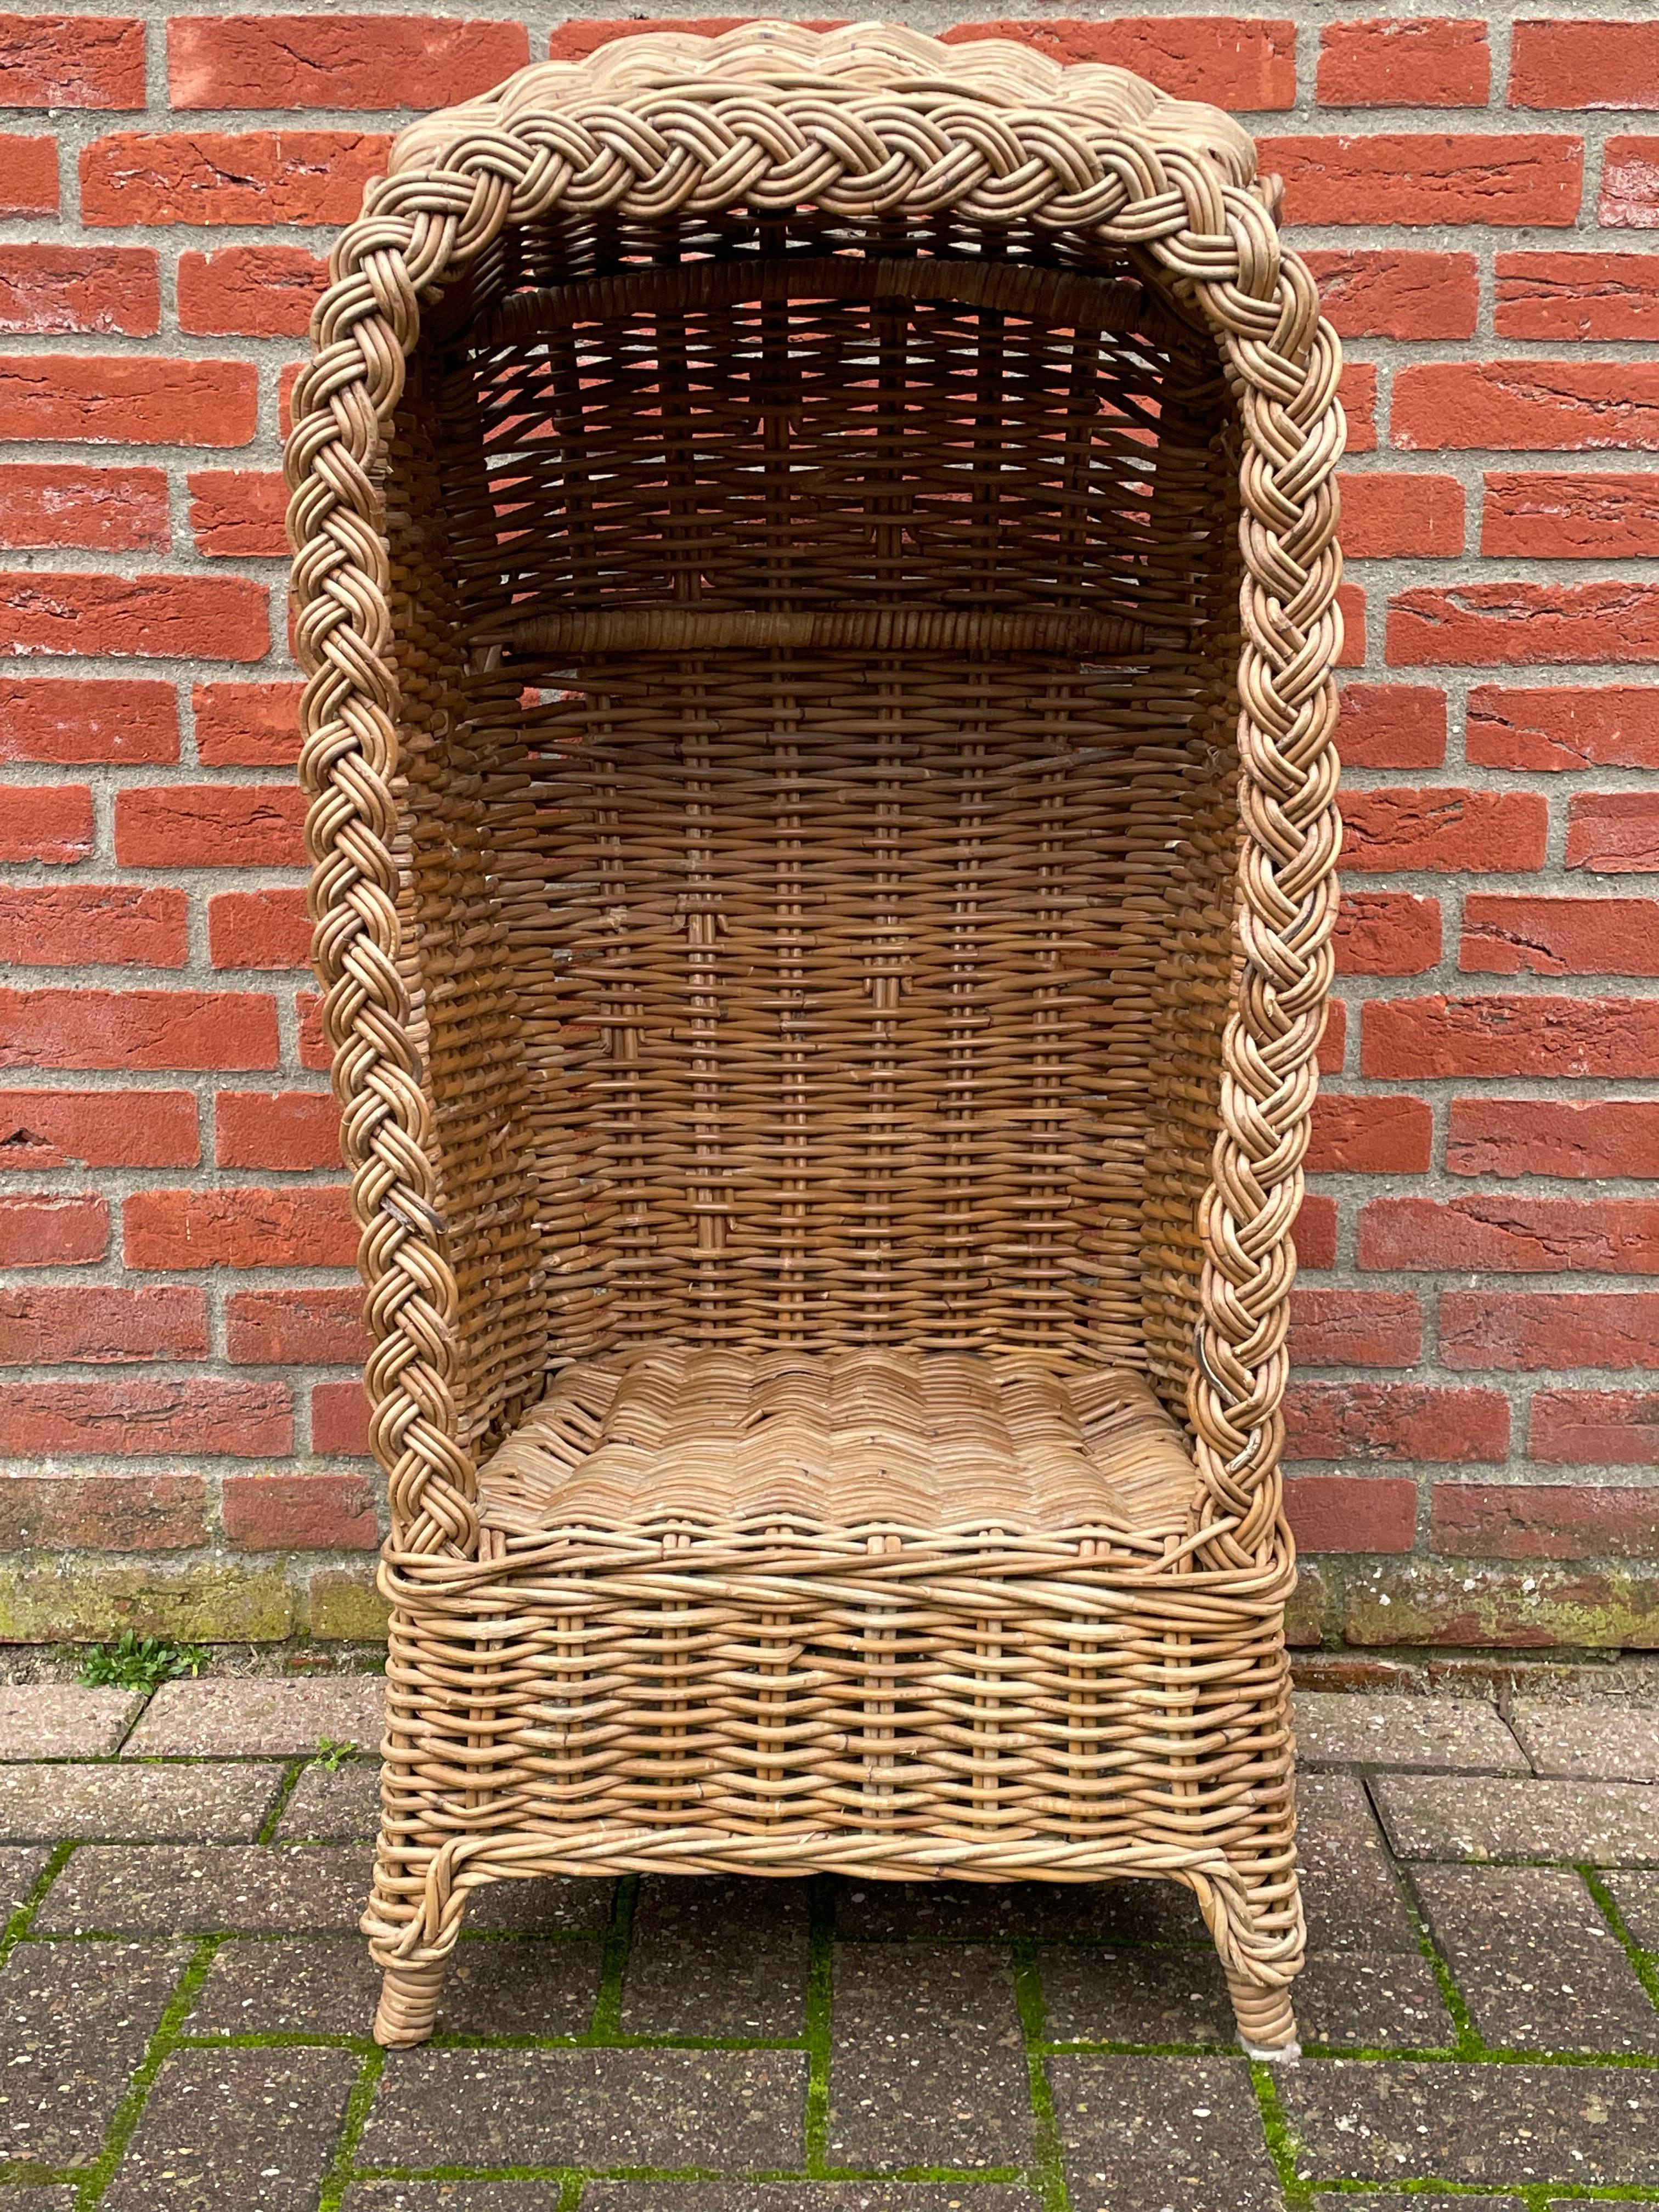 Victorian Very Rare & Super Decorative Antique-Like Hand Woven Rattan Beach Chair for Kids For Sale